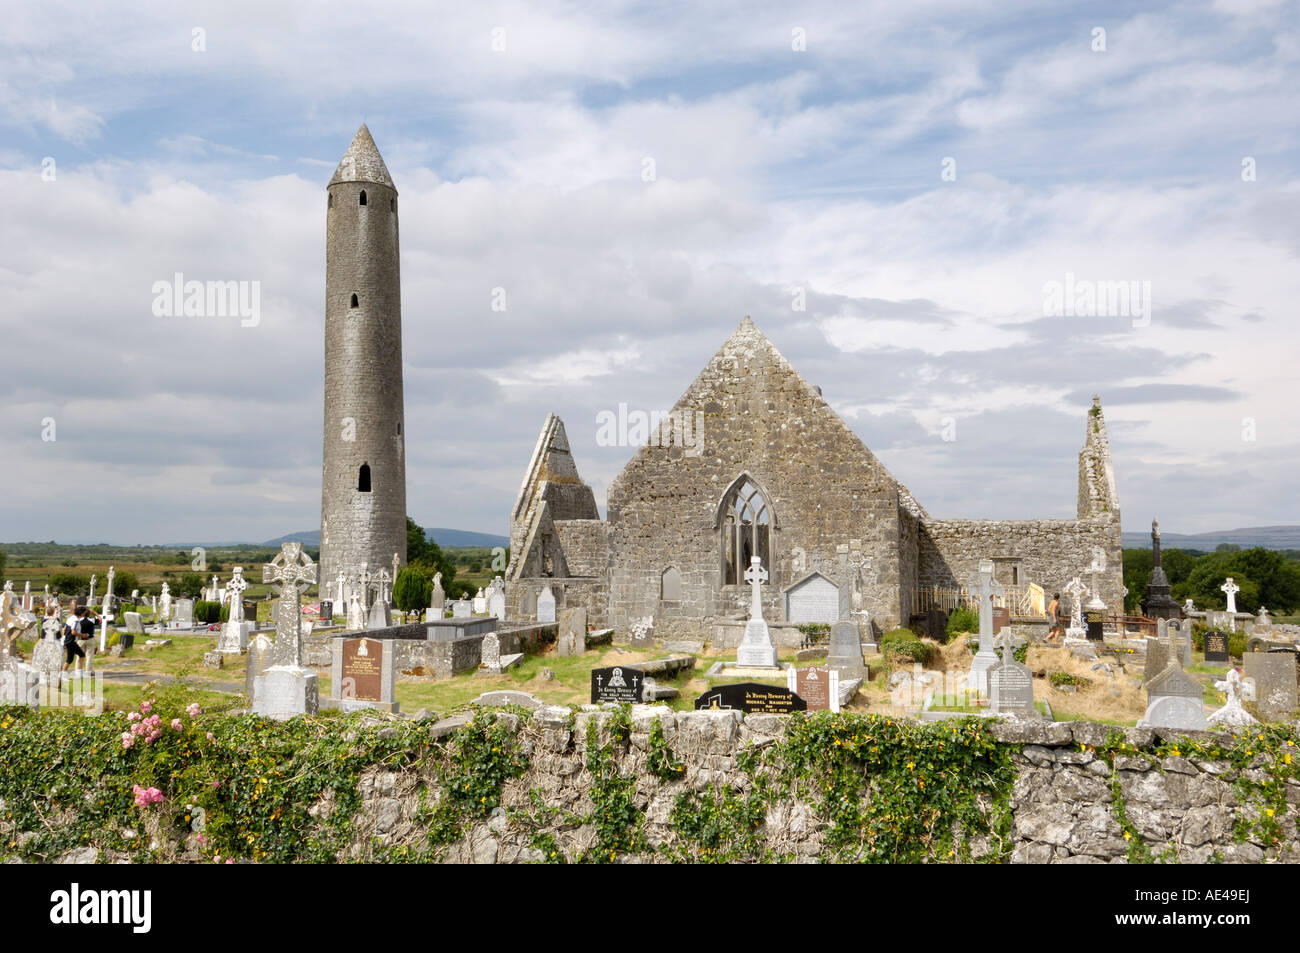 Kilmacdaugh churches and round tower, near Gort, County Galway, Connacht, Republic of Ireland, Europe Stock Photo